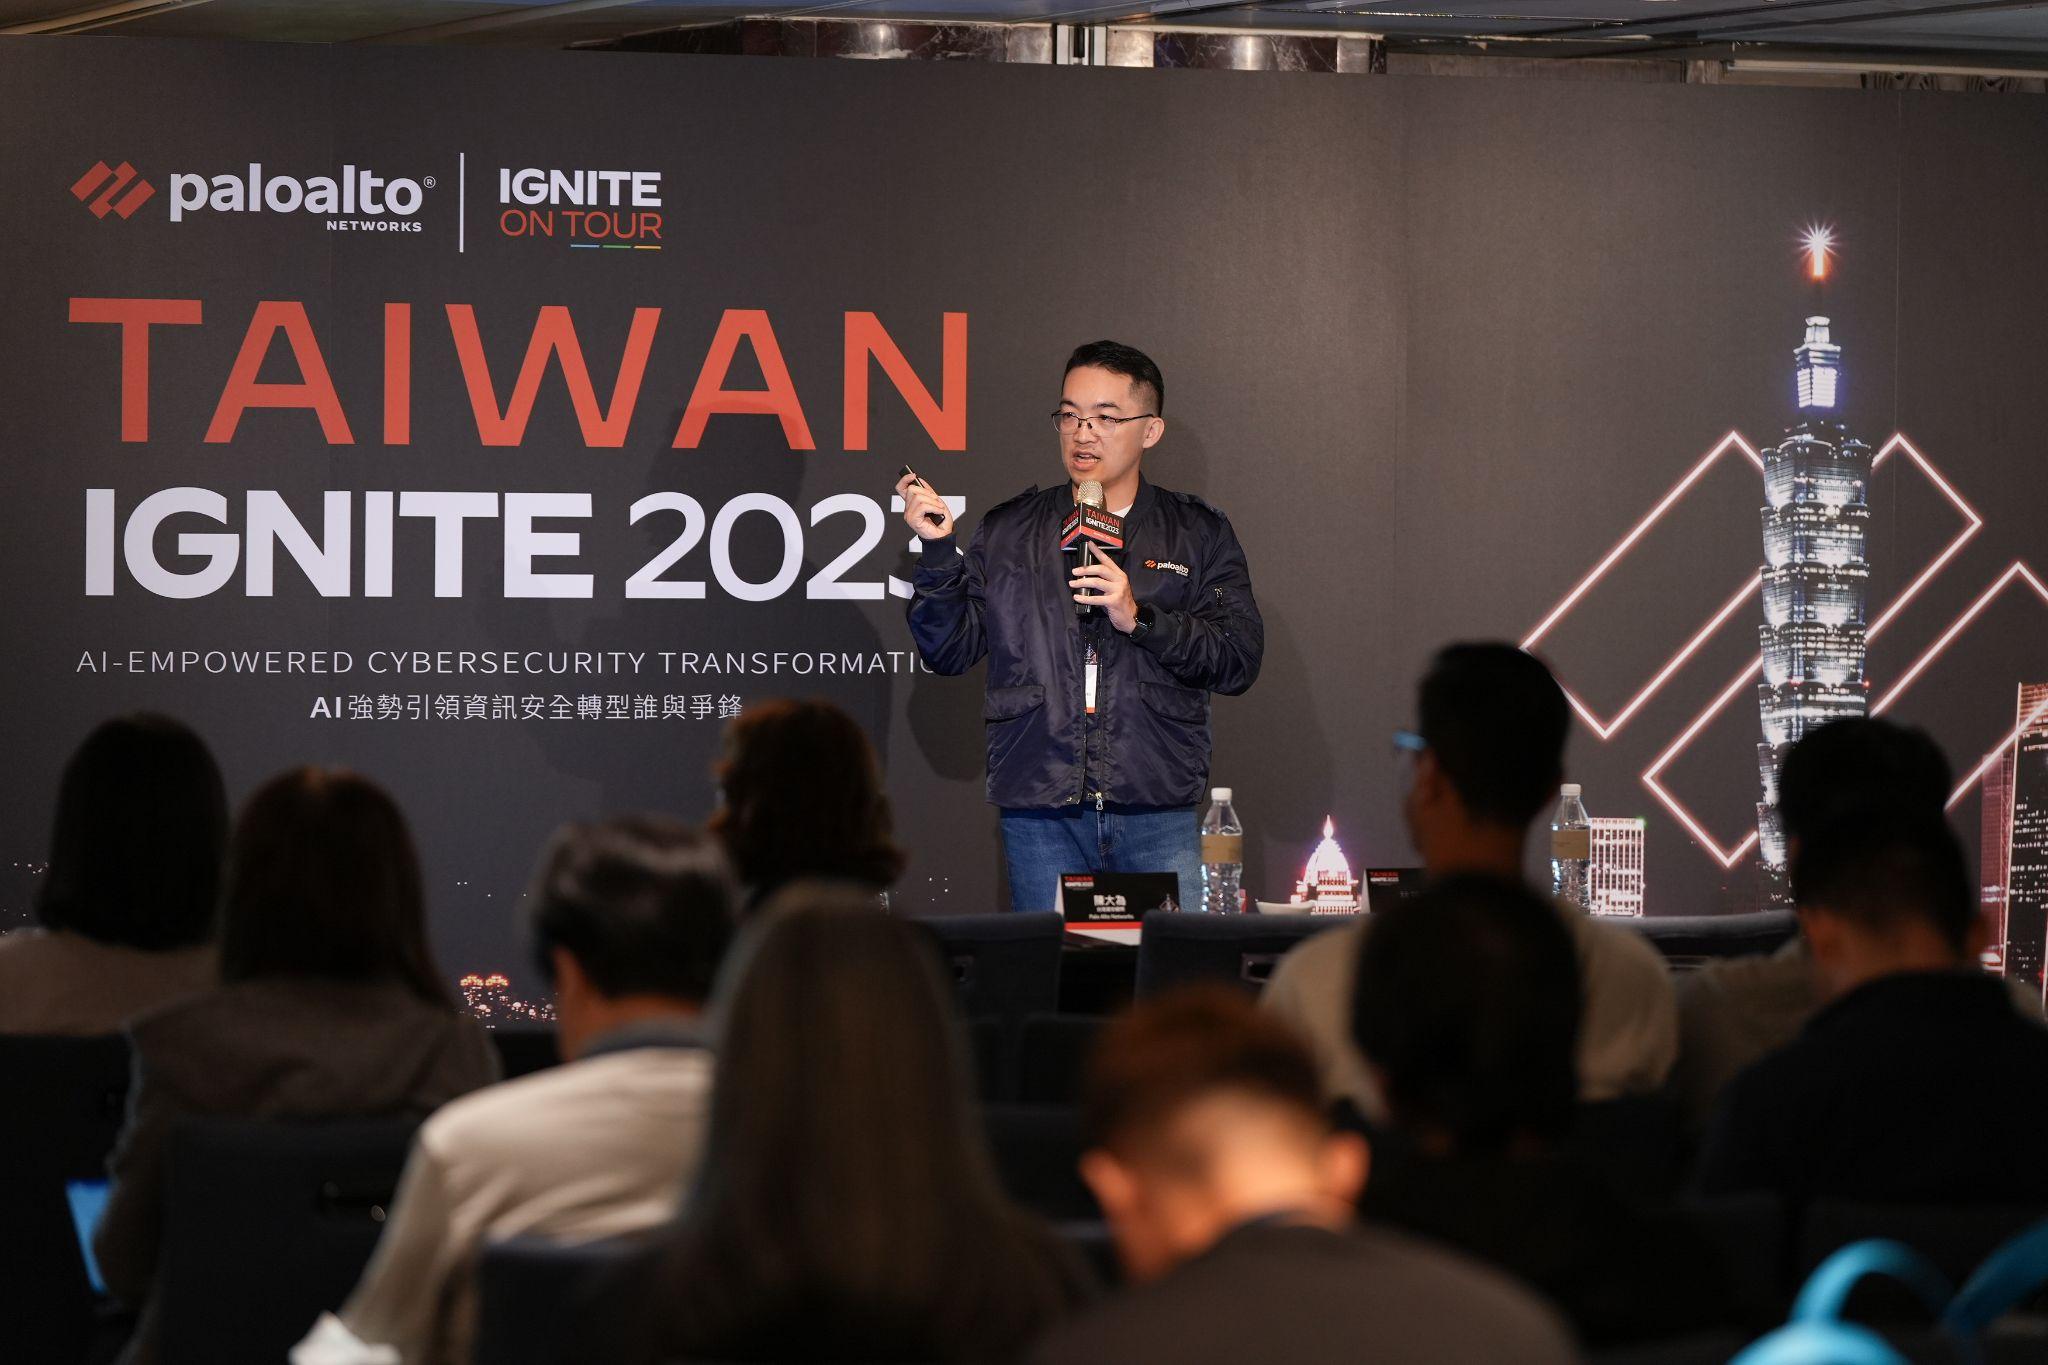 Image of breakout sessions in Taiwan Ignite.